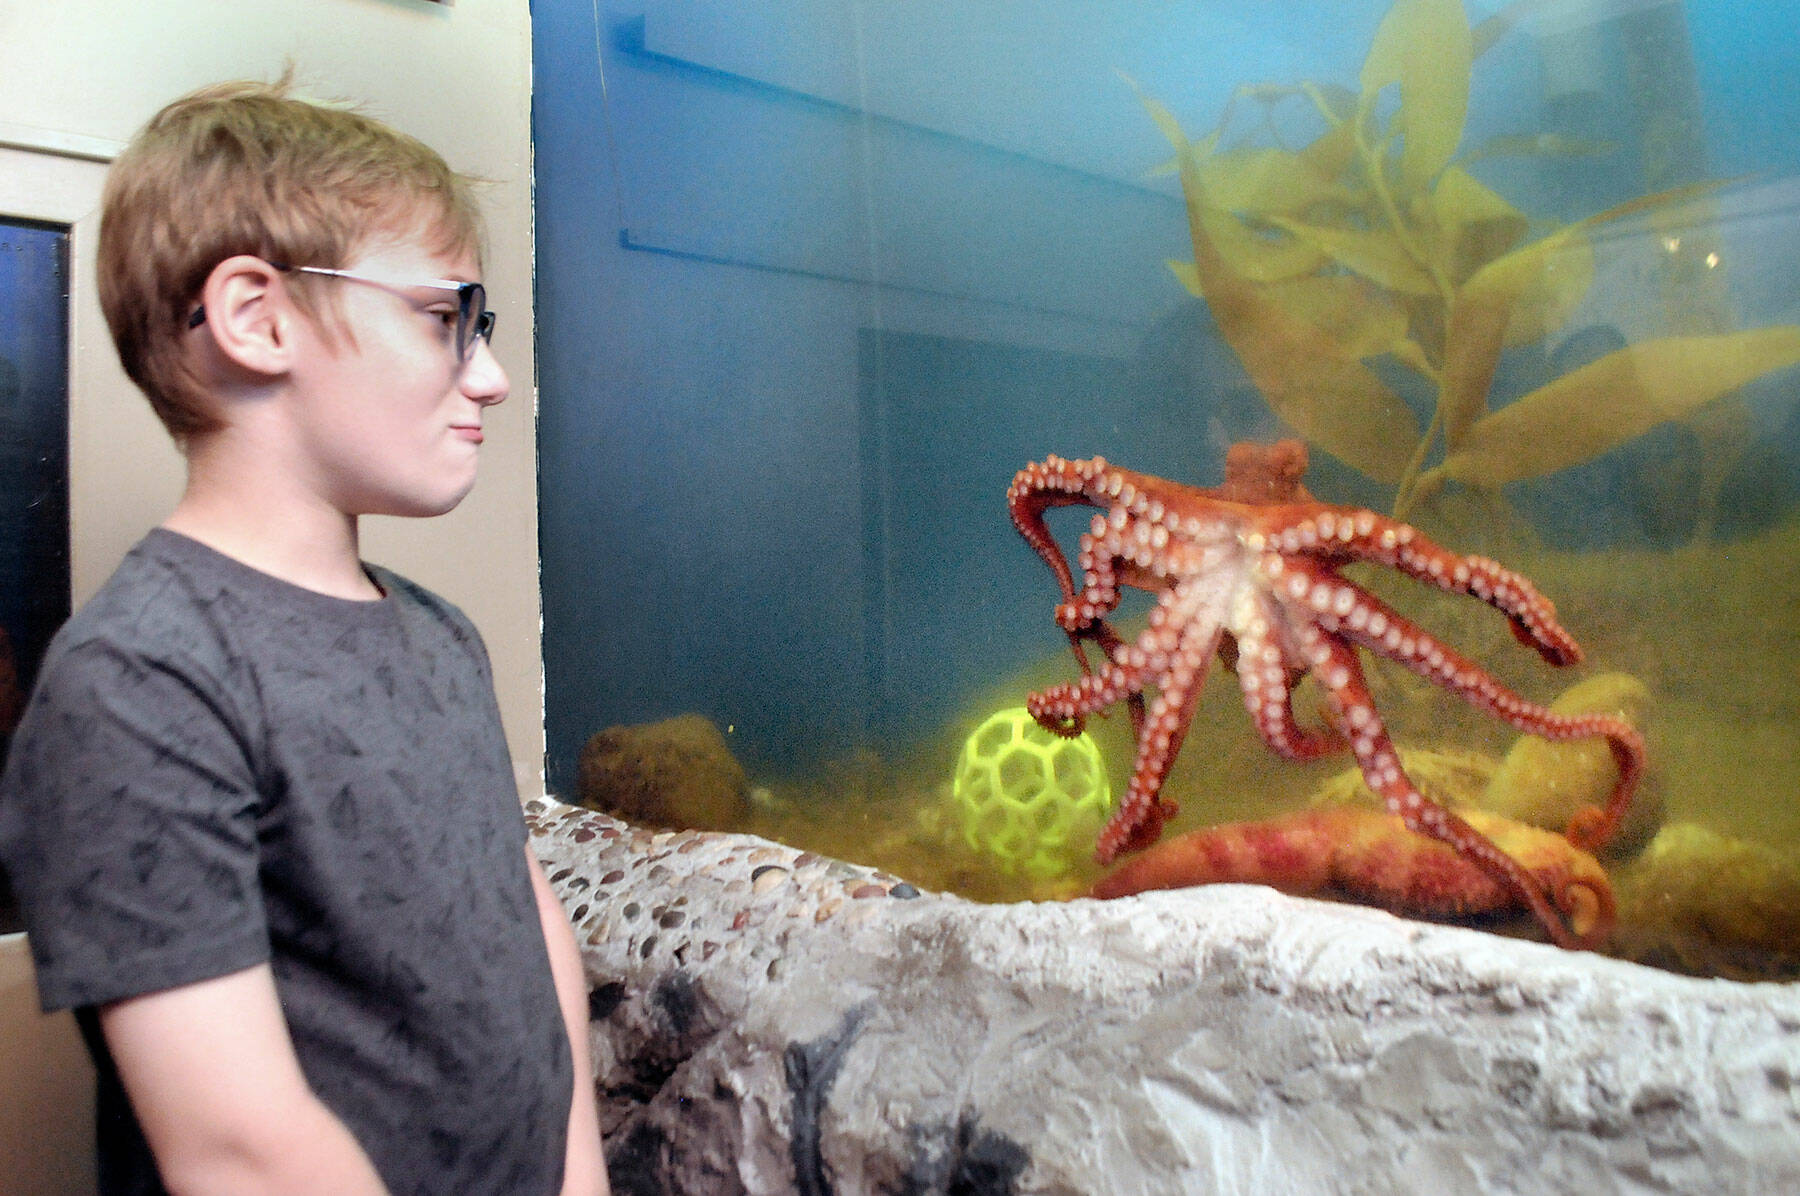 Landon Williams, 8, of Lakewood watches a young giant Pacific octopus in its tank on Thursday at Feiro Marine Life Center at Port Angeles City Pier. (Keith Thorpe/Peninsula Daily News)